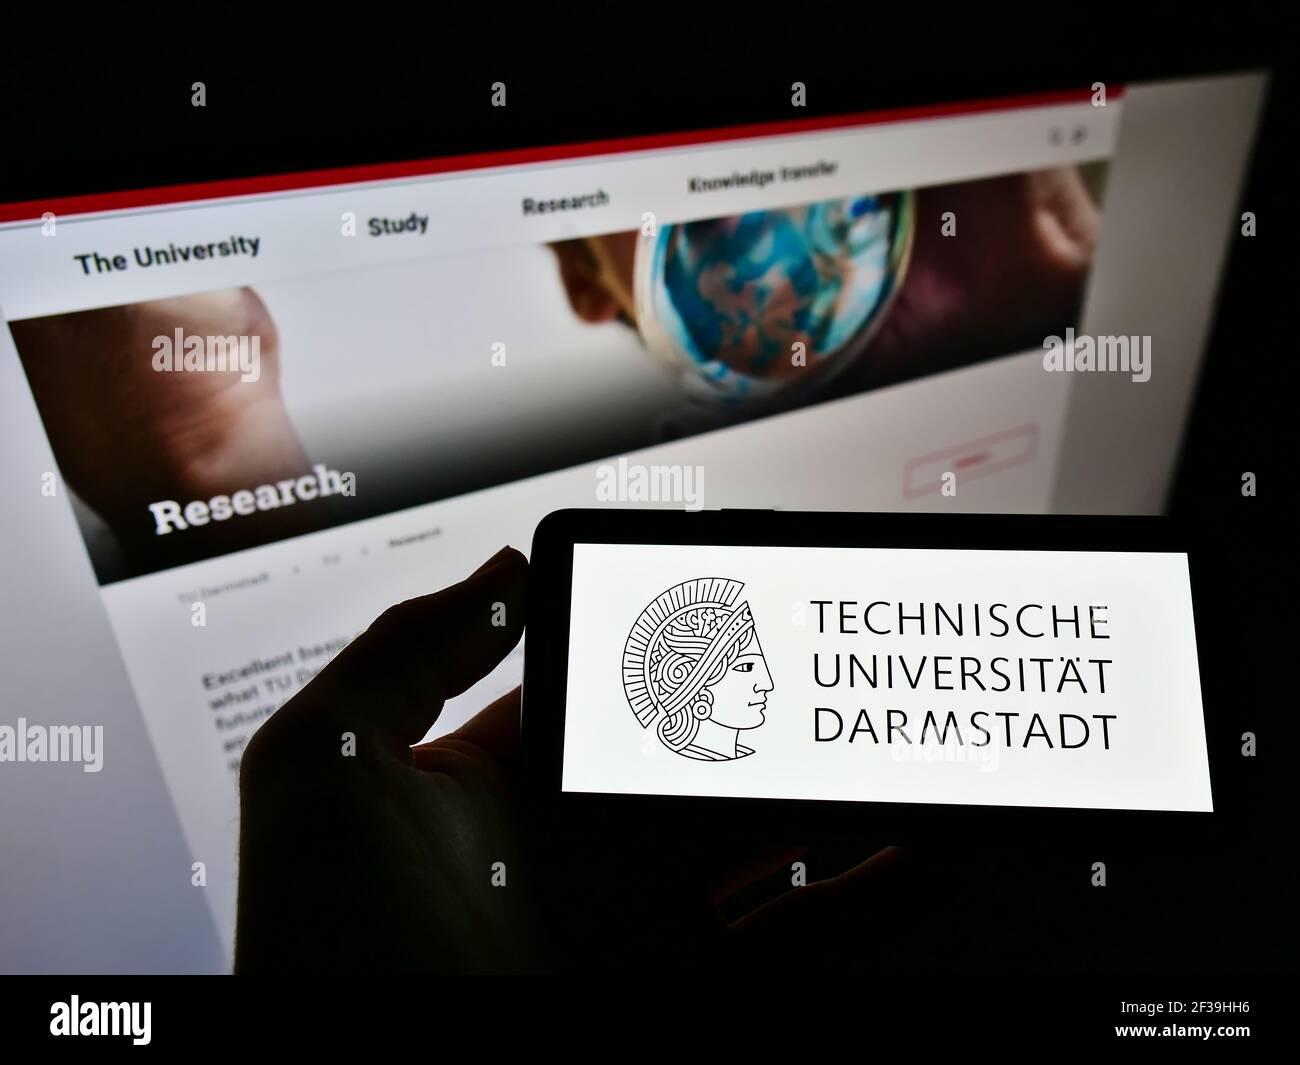 Person holding mobile phone with logo of German Technical University of Darmstadt on screen in front of web page. Focus on cellphone display. Stock Photo